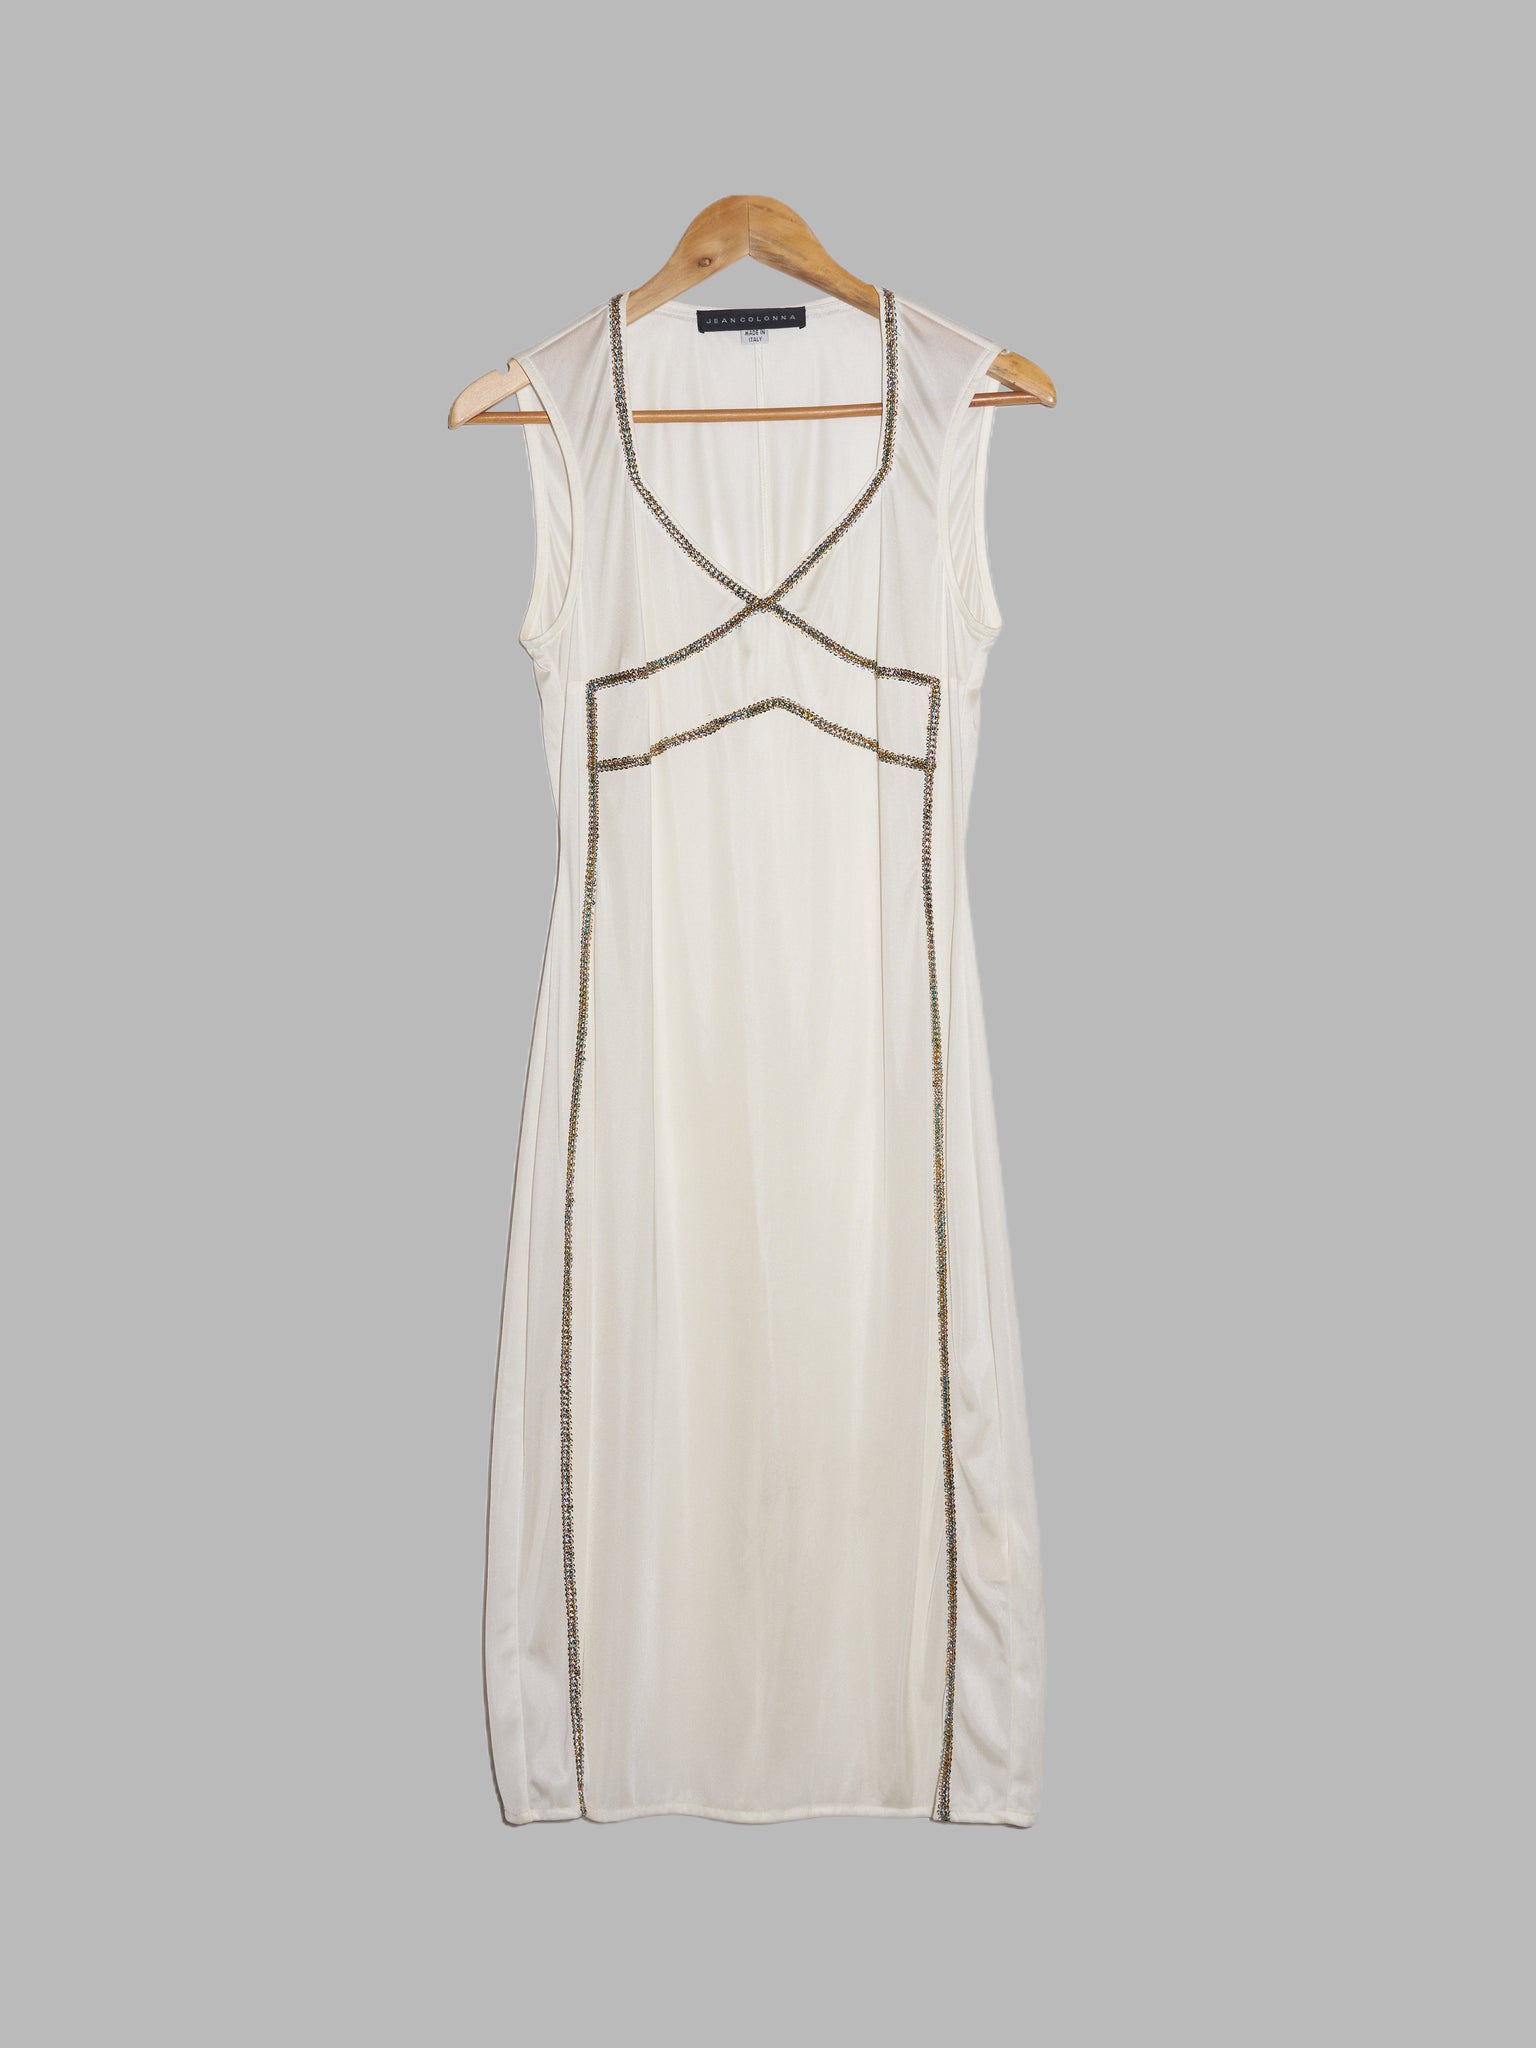 Jean Colonna off-white cream sleeveless dress with bejeweled applique - size 44